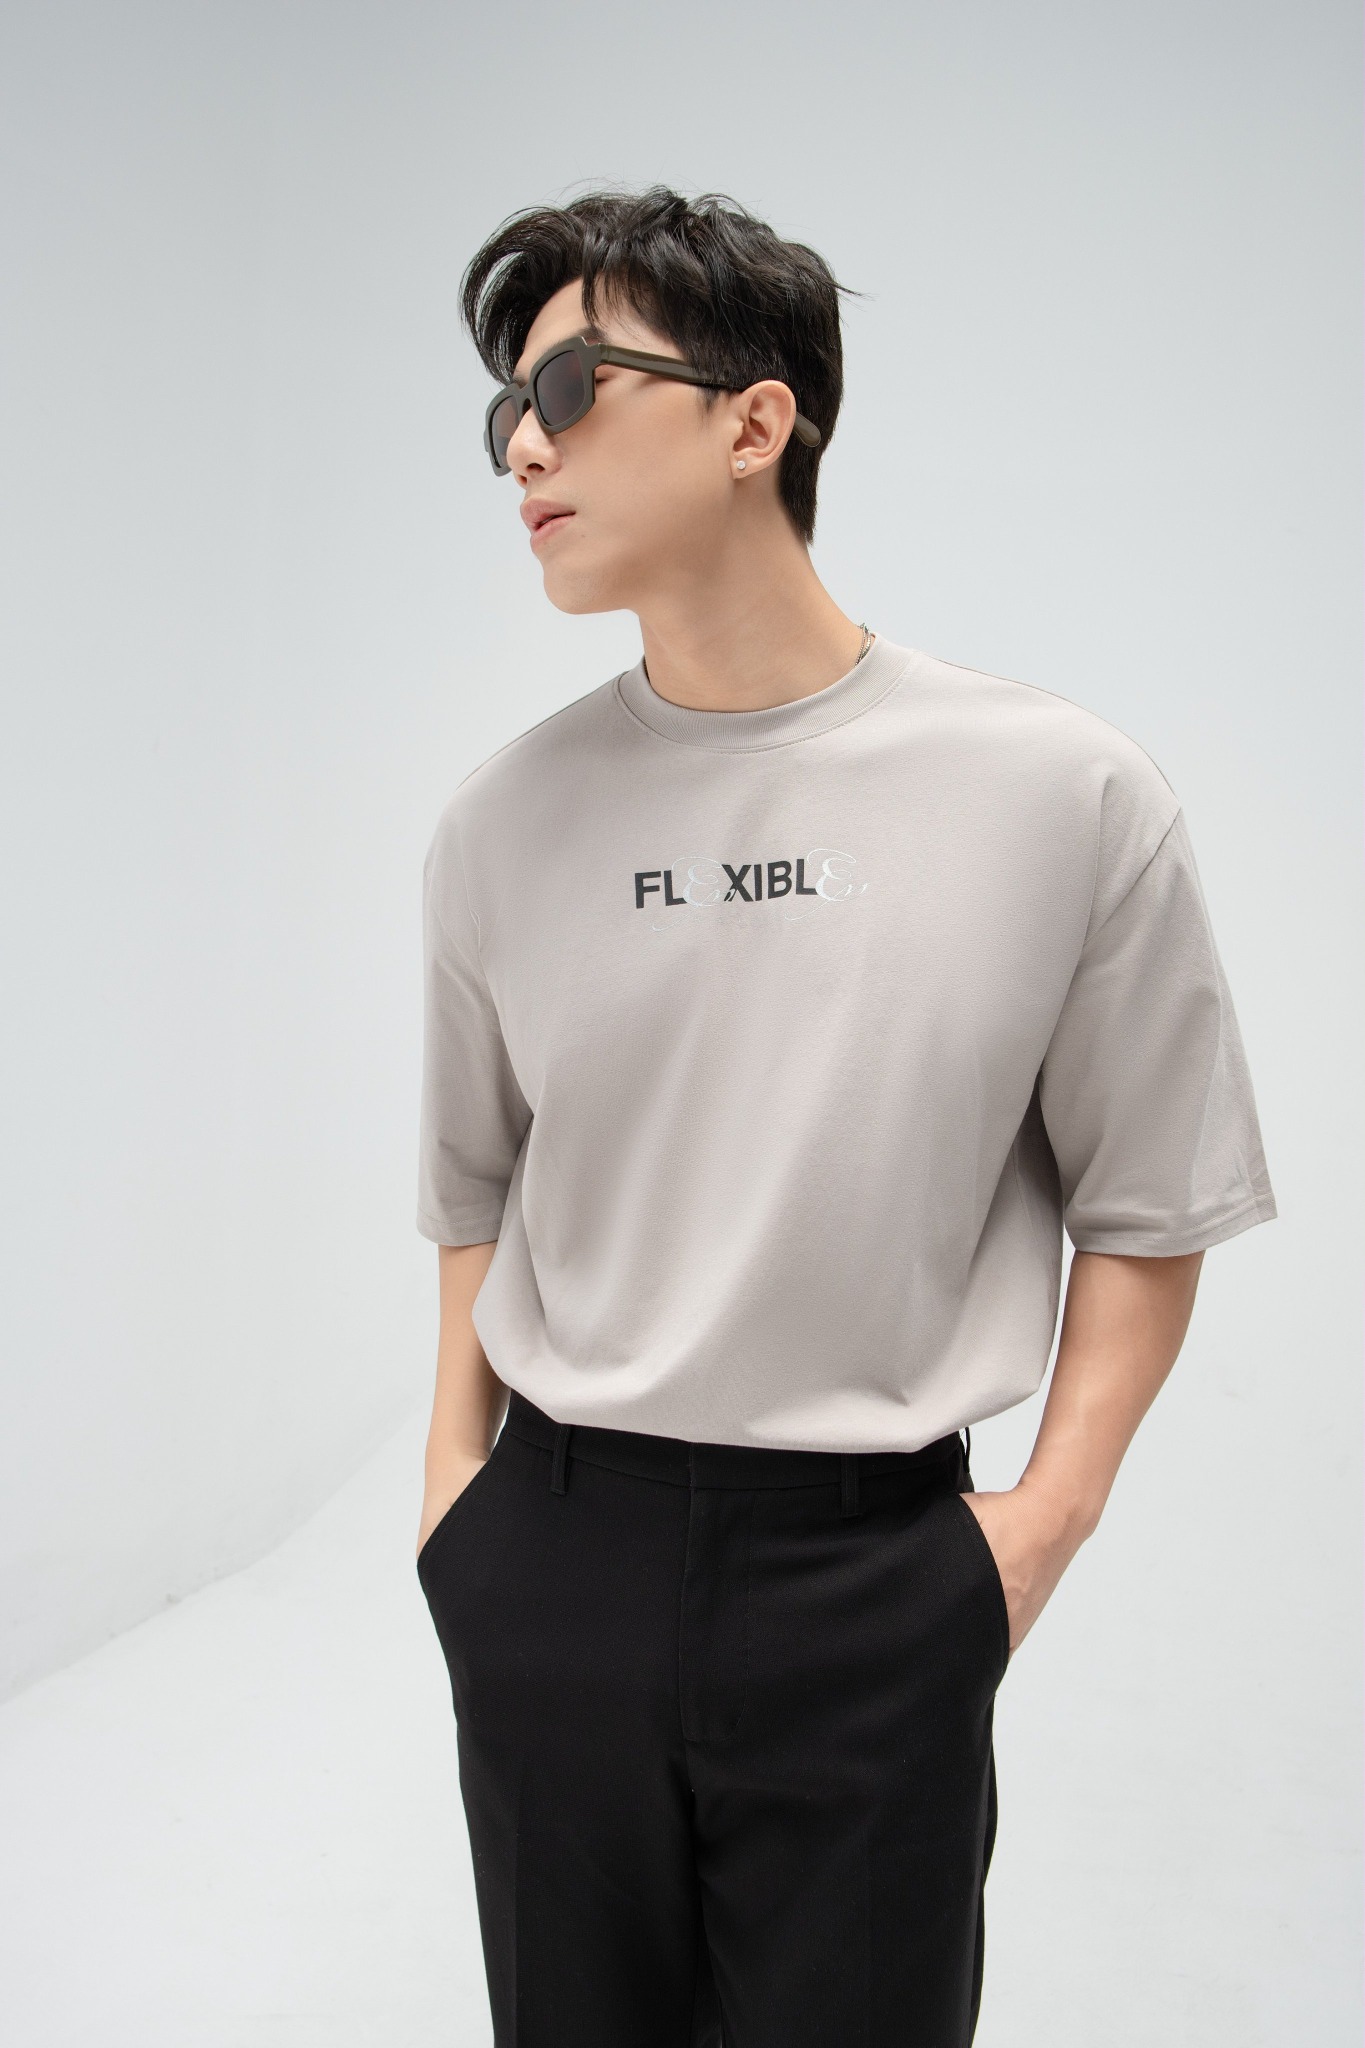 AG91 FACTORY OVERSIZE NEW PRINTED "FLEXIBLE" T-SHIRT - BEIGE